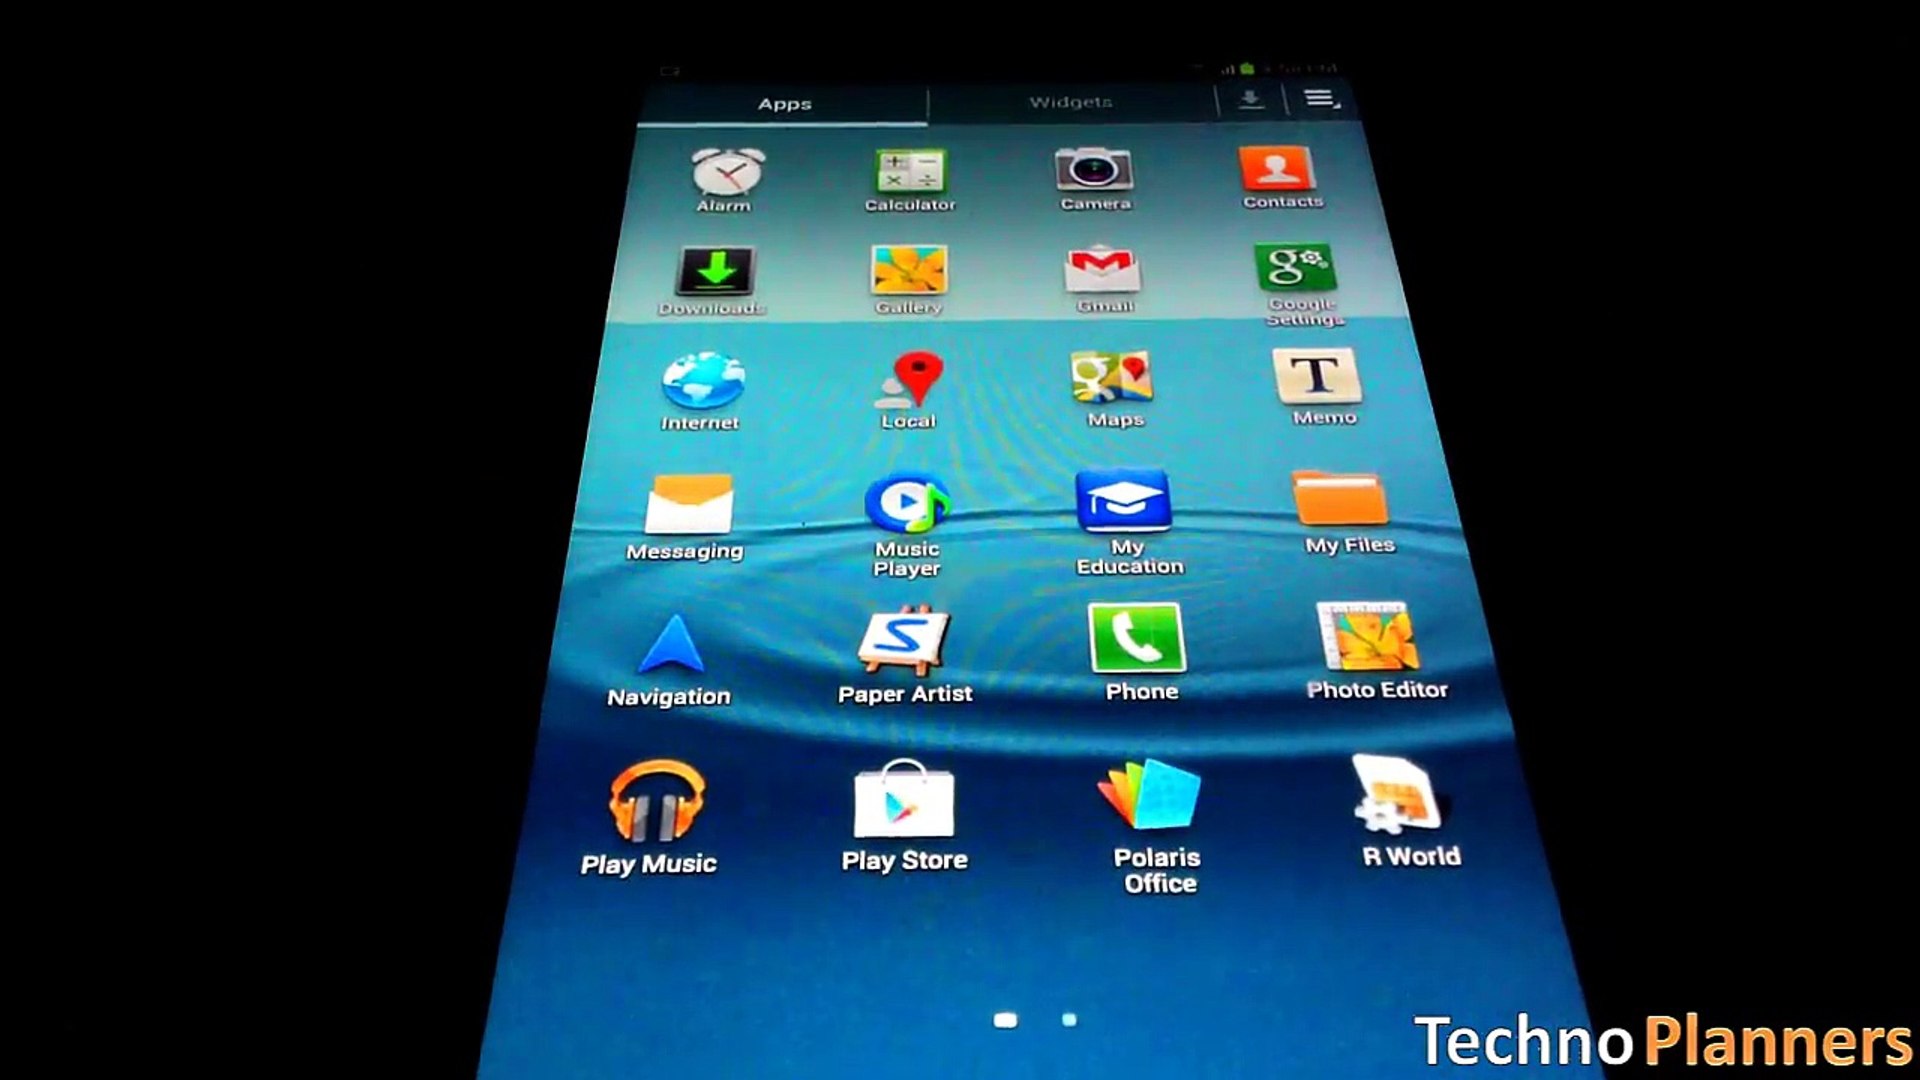 How To Install Android 5.1 on Galaxy Tab 2 7.0 - Vídeo Dailymotion